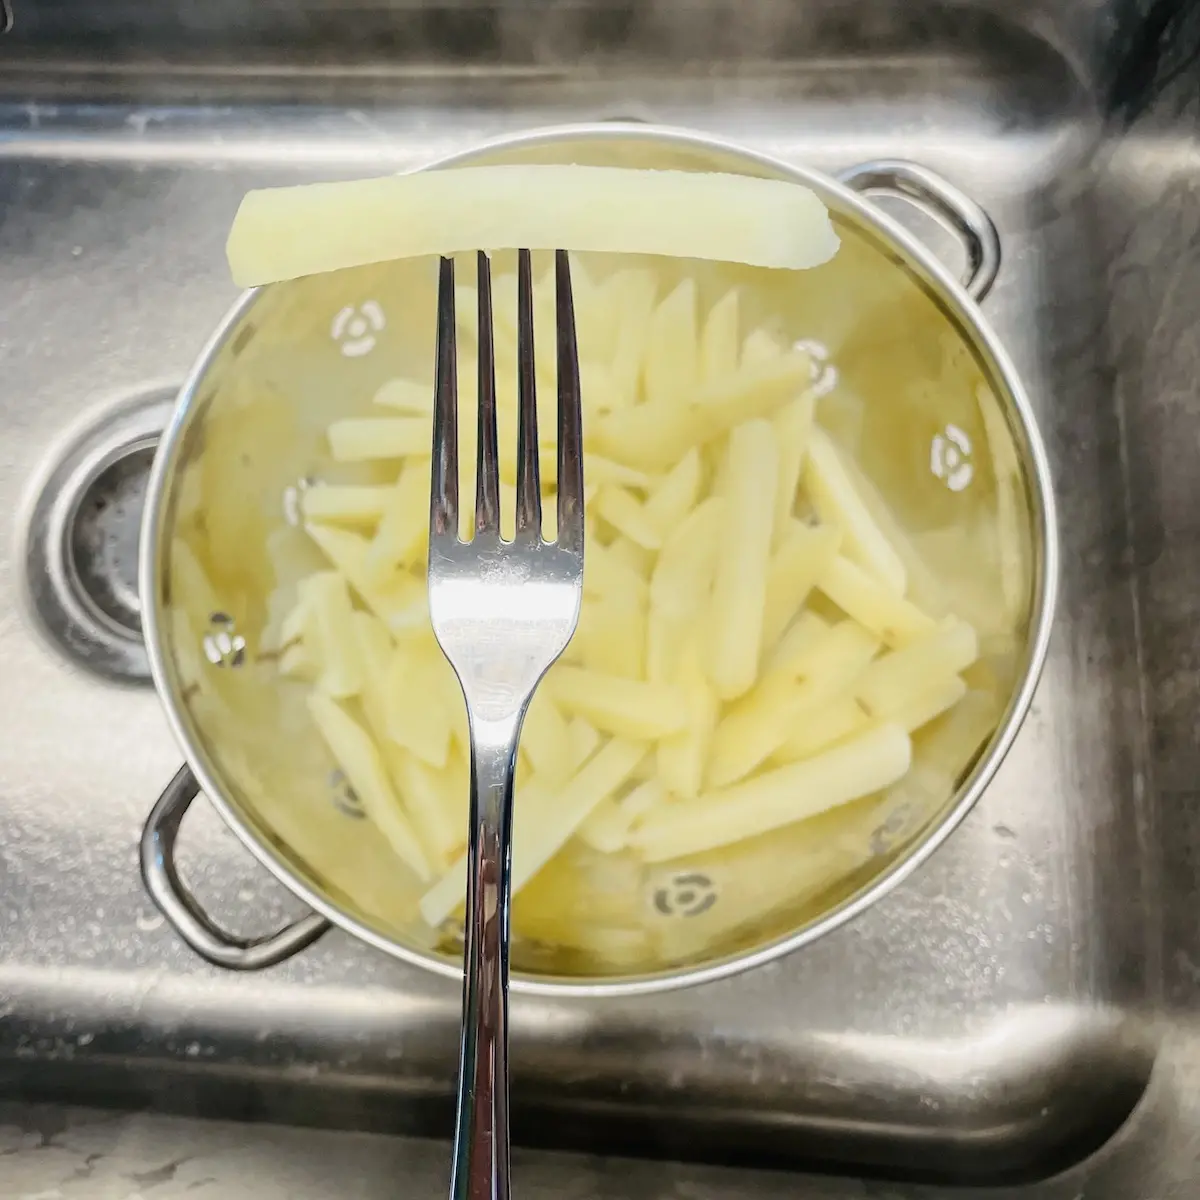 Oven French Fries Step 2 Drain Boiled Potatoes in Sink